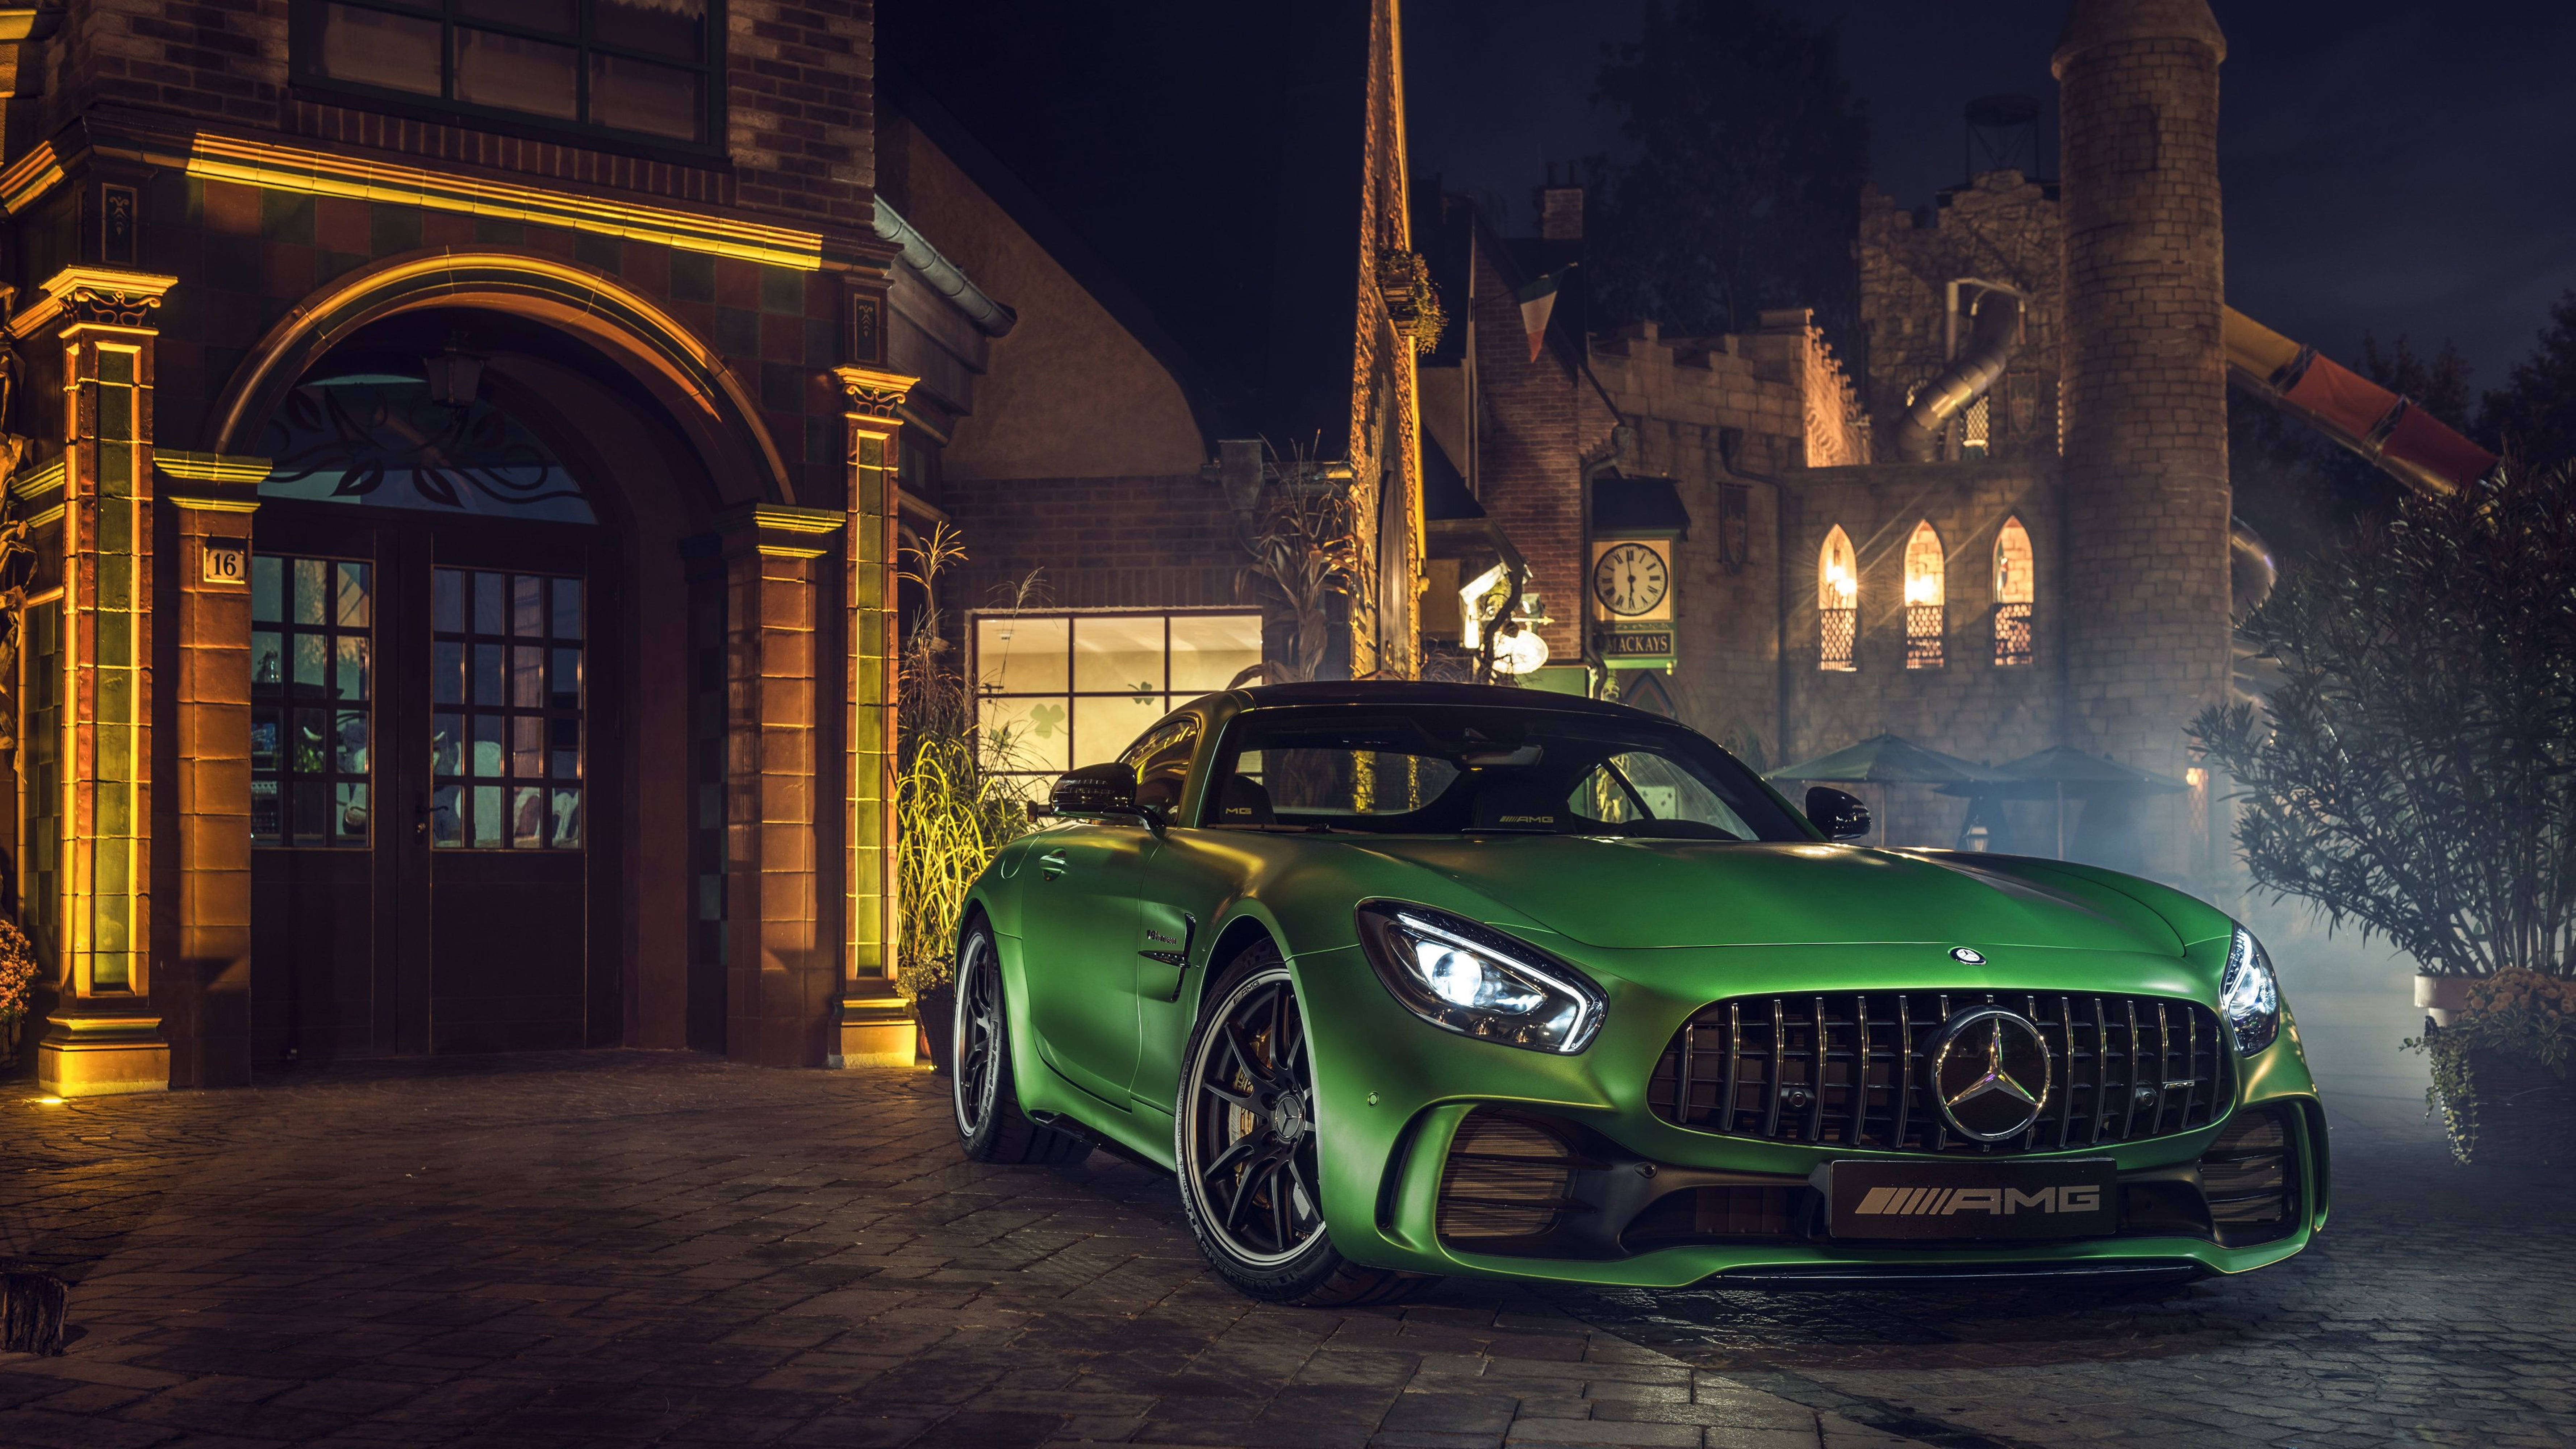 Caption: Striking Elegance - A Mercedes-amg In A Captivating Green Hue Standing Outside A Modernistic Building. Background